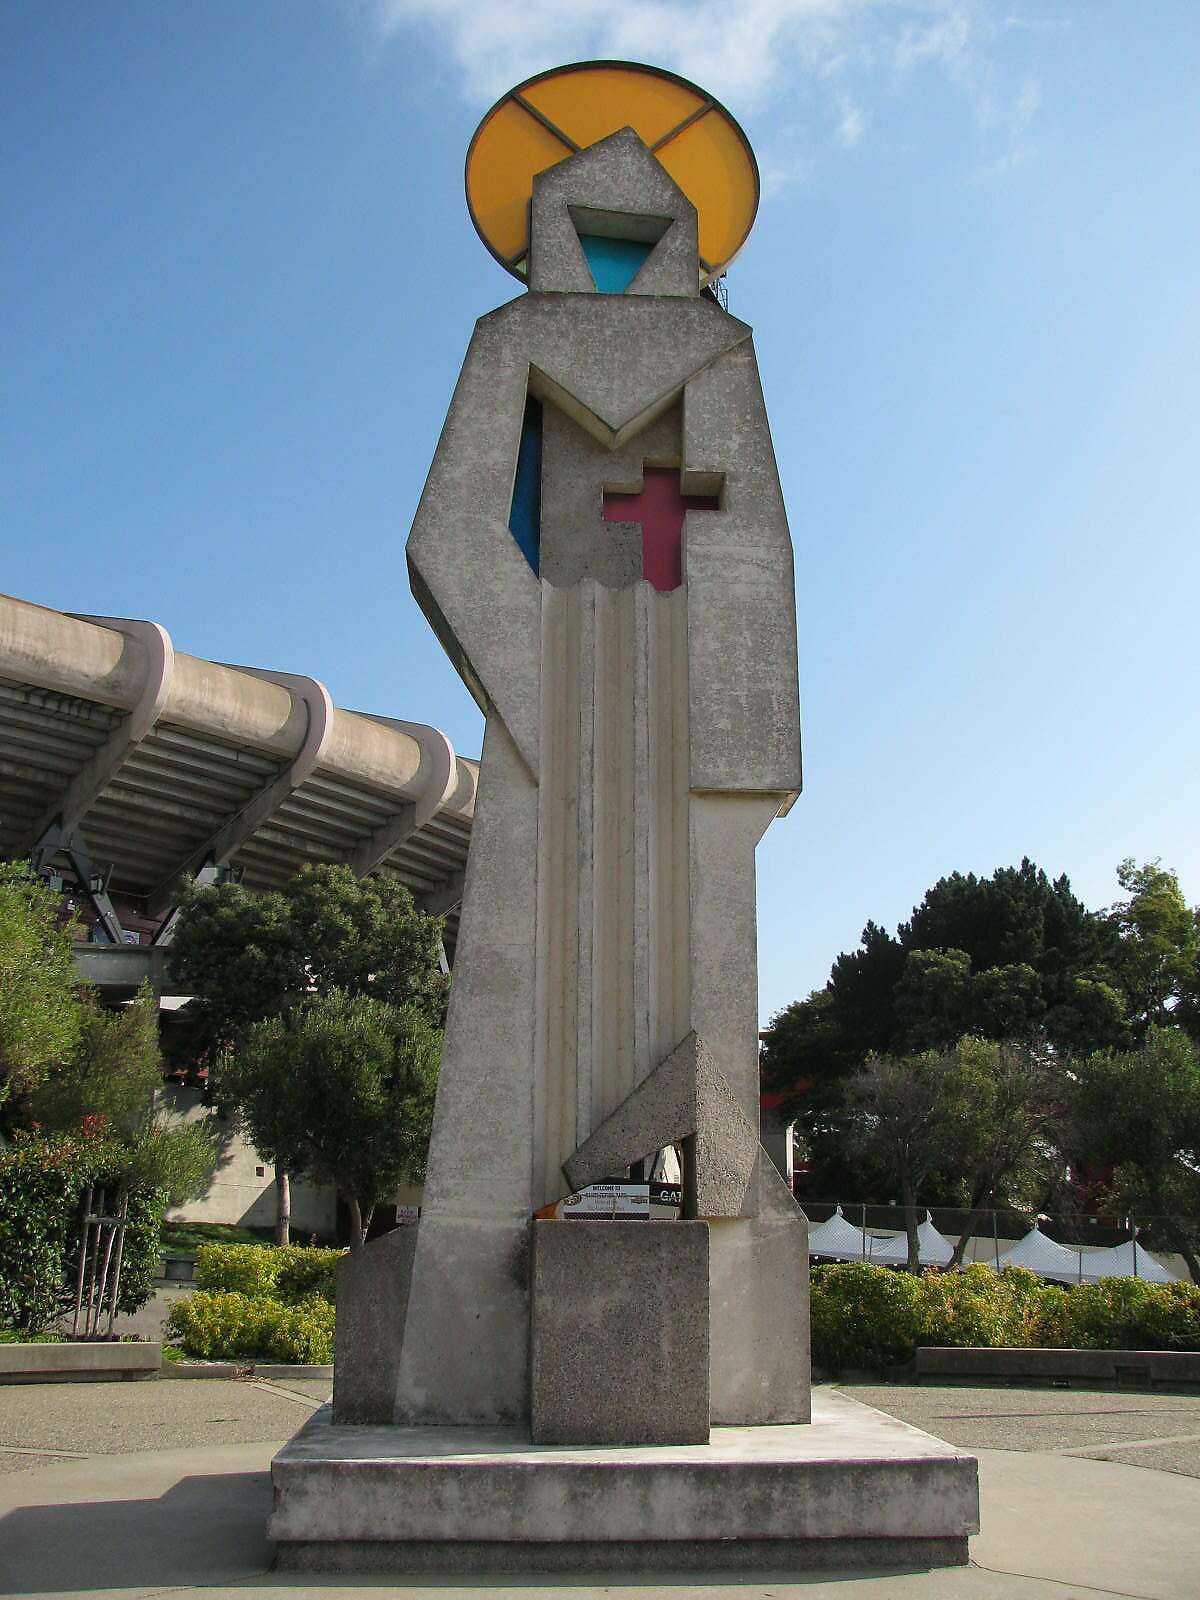 The 27-foot-tall statue of St. Francis, which has stood outside Candlestick Park since 1973, is being evicted to make way for a new shopping center and hotel. It was created by artist Ruth Wakefield Cravath